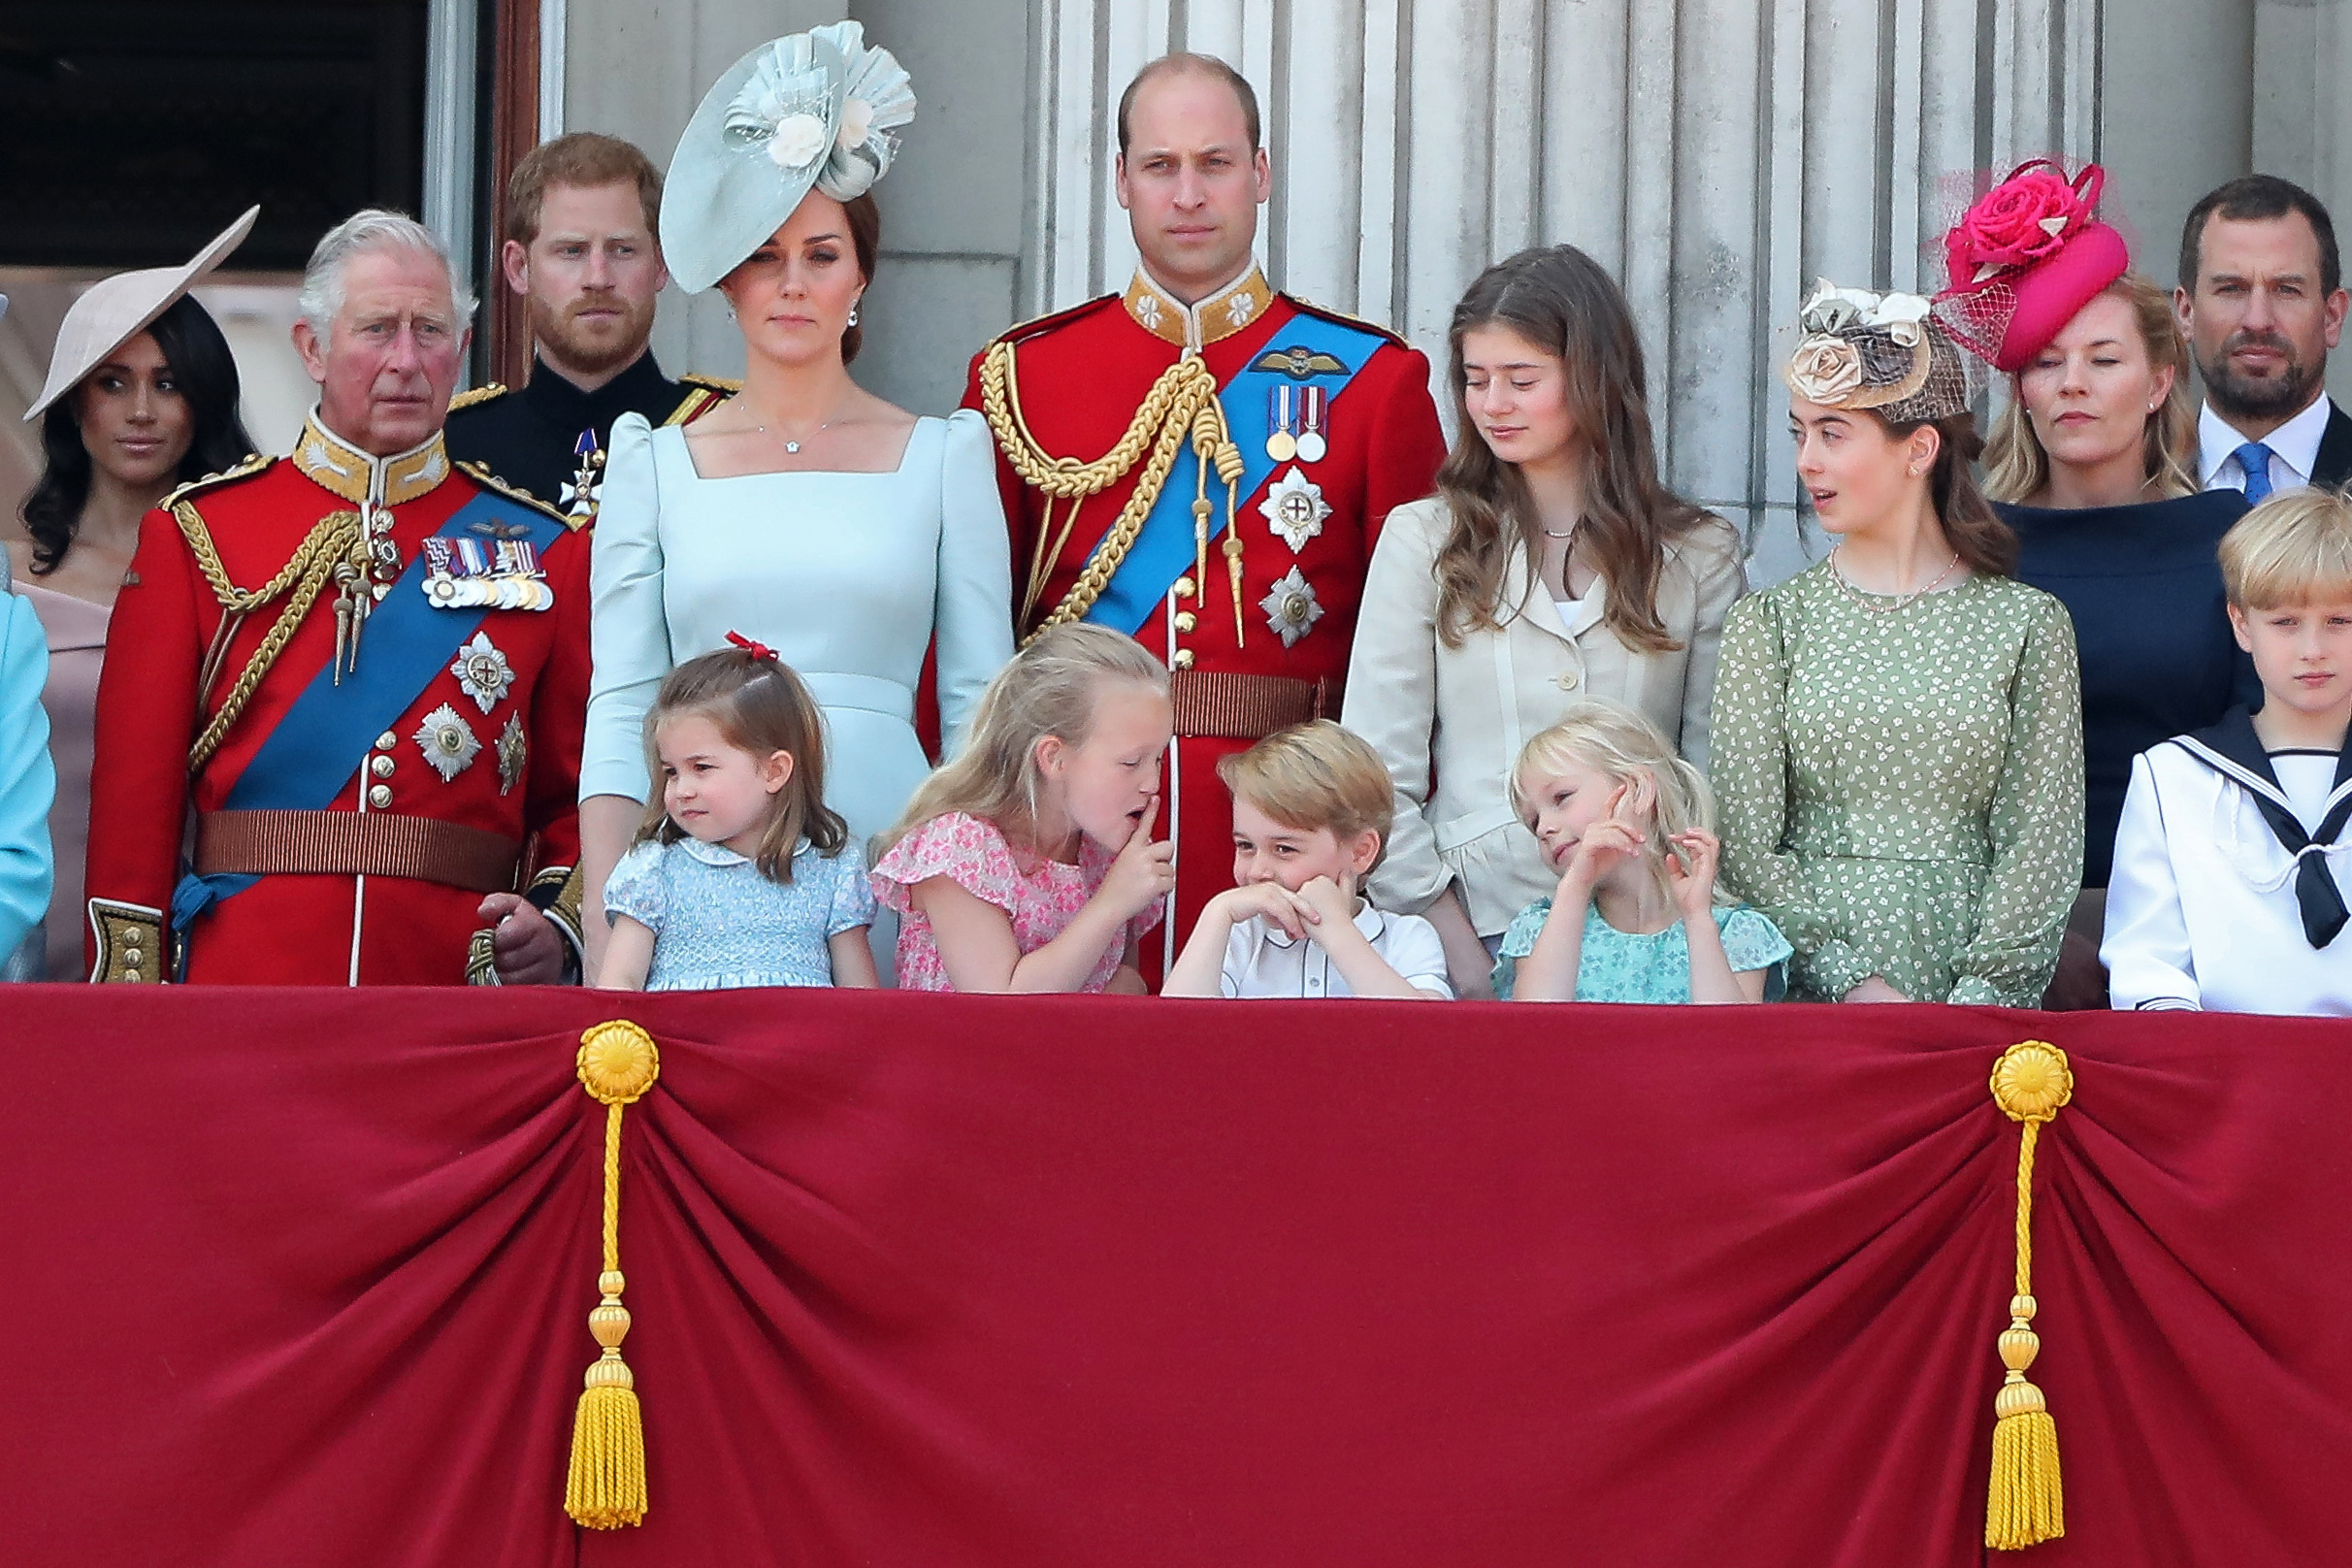 In the front row (L-R), children, Princess Charlotte of Cambridge, Savannah Phillips, Prince George of Cambridge and Isla Phillips chat on the balcony of Buckingham Palace as members of the Royal Family gather to watch a fly-past of aircraft by the Royal Air Force, in London on June 9, 2018. (DANIEL LEAL-OLIVAS—AFP/Getty Images)